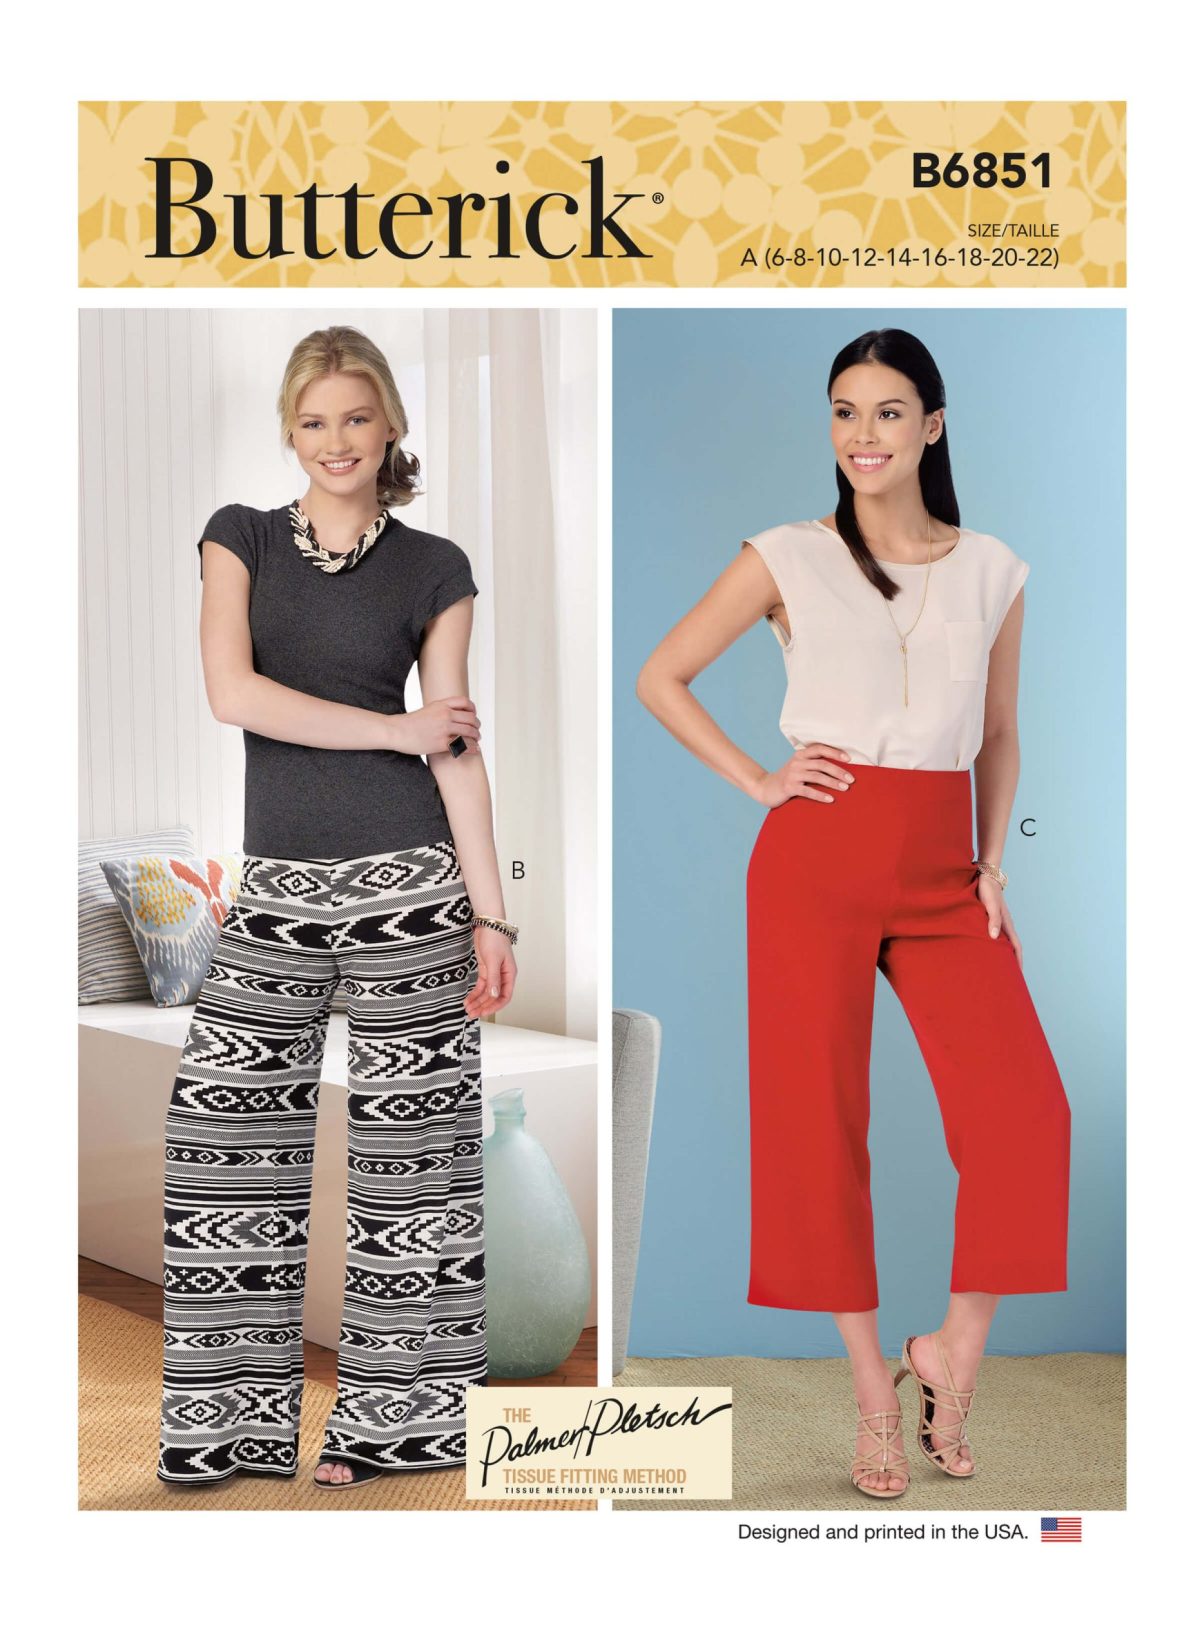 Butterick Sewing Pattern B6851 Misses' No-Side-Seam Shorts, Capris & Trousers Palmer/Pletsch